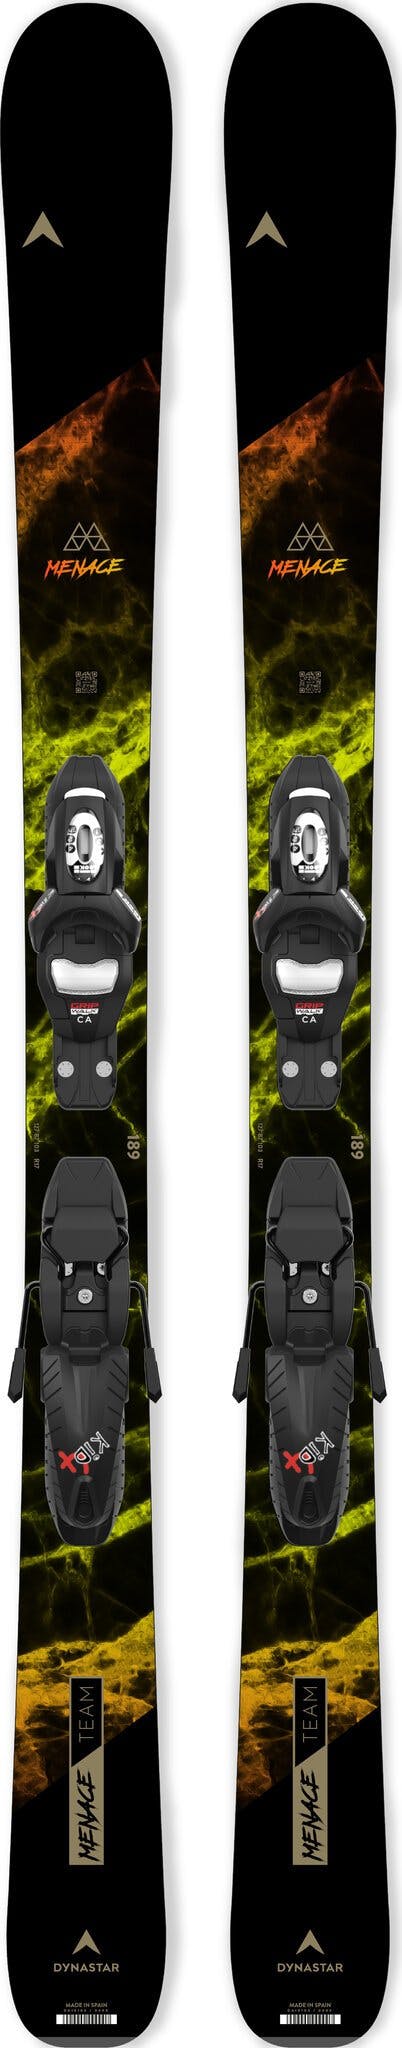 Product image for M-Menace Team Skis with KID 4 GW Binding - Kids